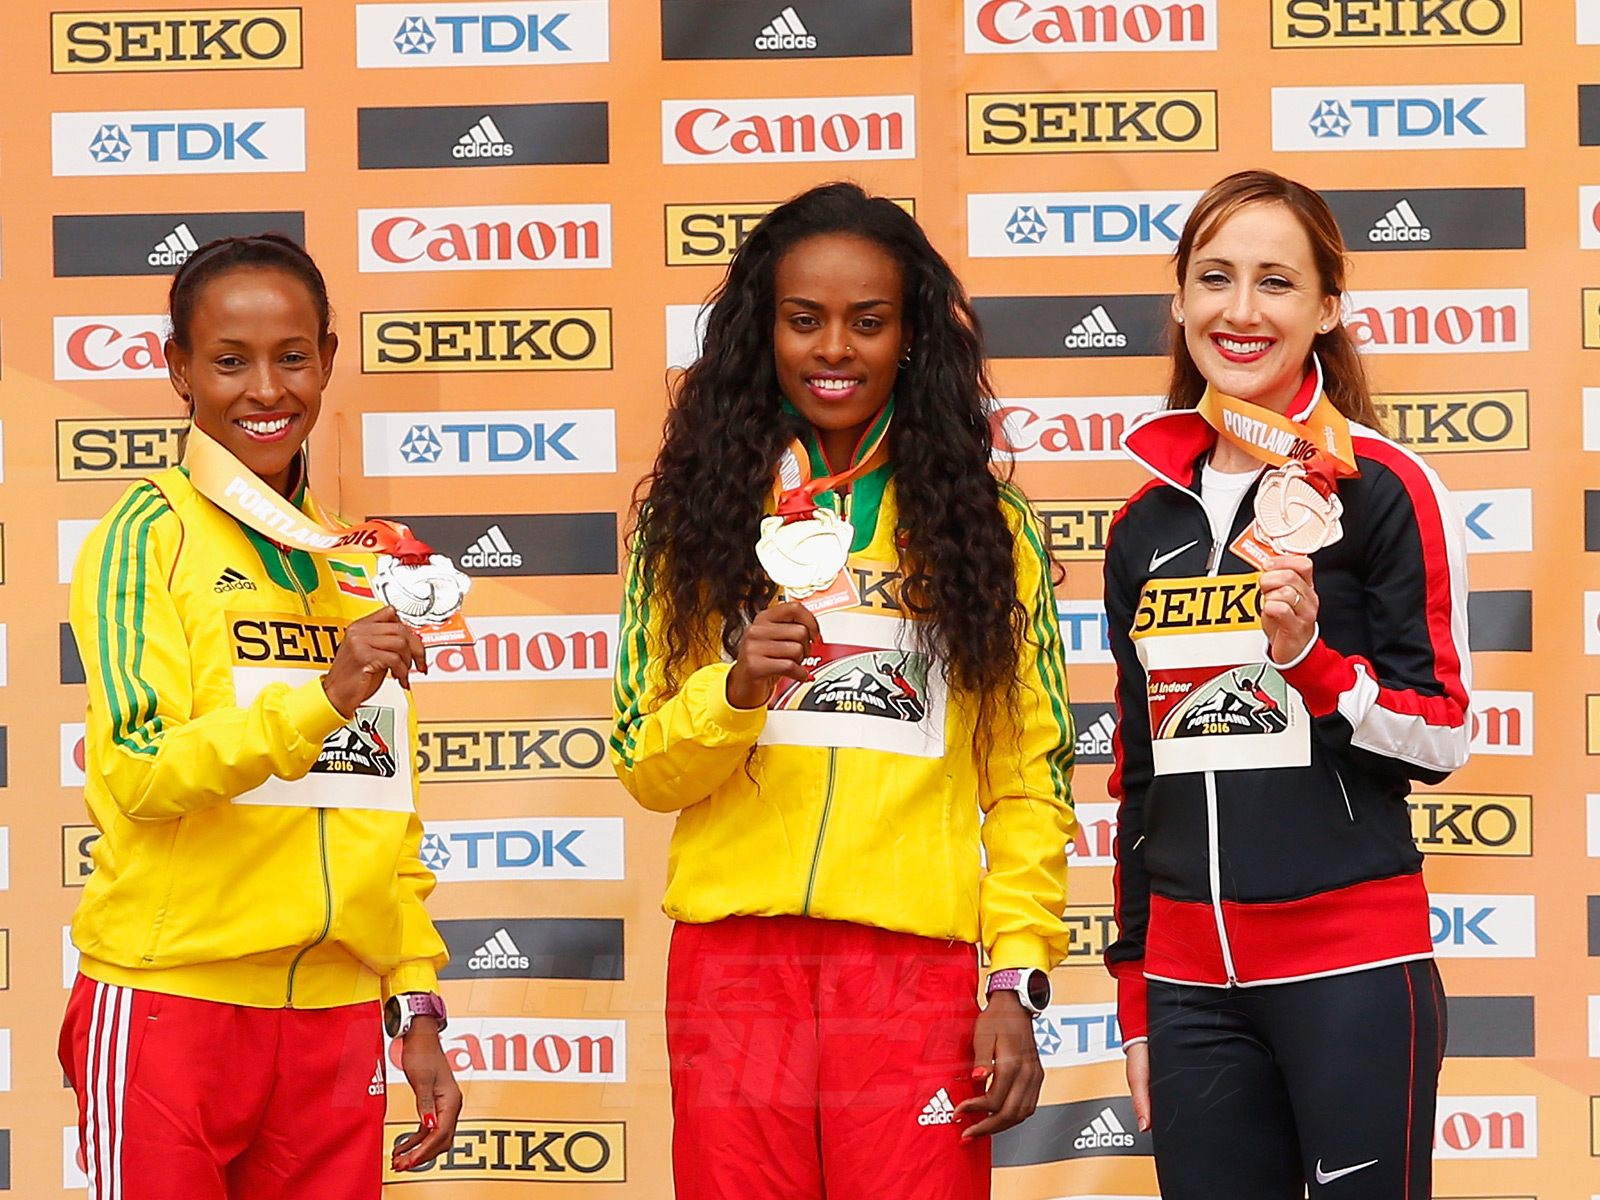 (L-R) Silver medallist Meseret Defar of Ethiopia, gold medallist Genzebe Dibaba of Ethiopia and bronze medallist Shannon Rowbury of the United States during the medal ceremony for the Women's 3000 Metres during day four of the IAAF World Indoor Championships at Pioneer Courthouse Squareon March 20, 2016 in Portland, Oregon. (Photo by Christian Petersen/Getty Images for IAAF)